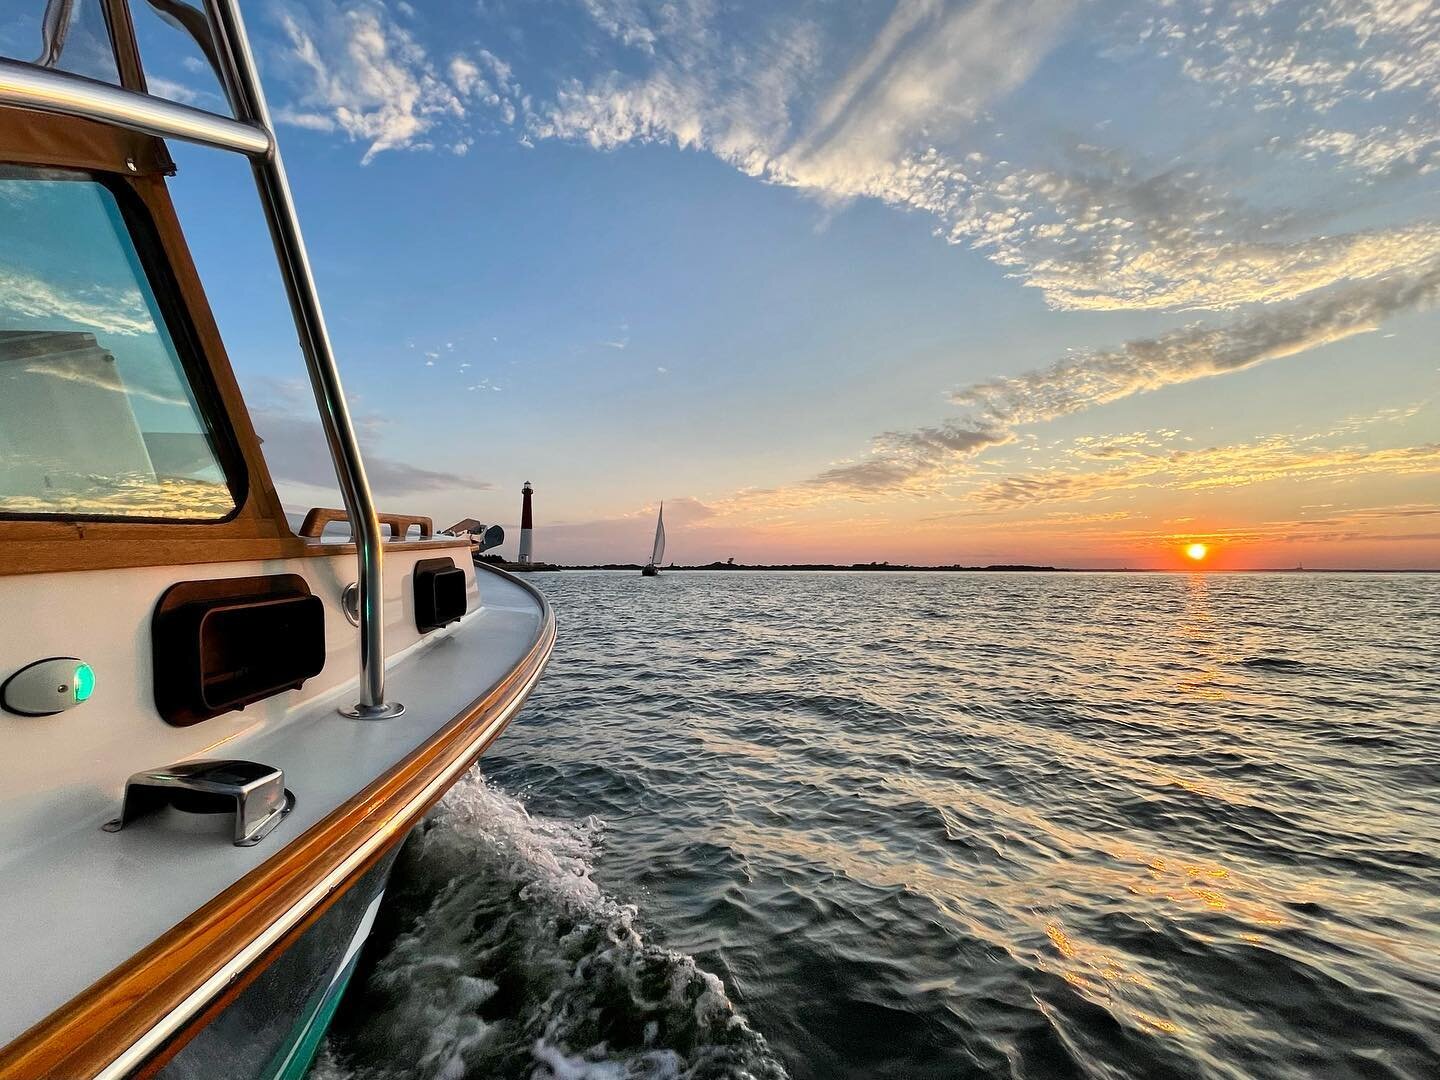 Setting sail into serenity 🌅⛵️ gracefully gliding through the calm waters of Barnegat Inlet, NJ, as the sun bids farewell to another beautiful evening. 🌊✨ 

#SunsetCruise #ClassicCharter #BarnegatInlet #NJBoating #SerenityAtSea #LBIluxurycharters #